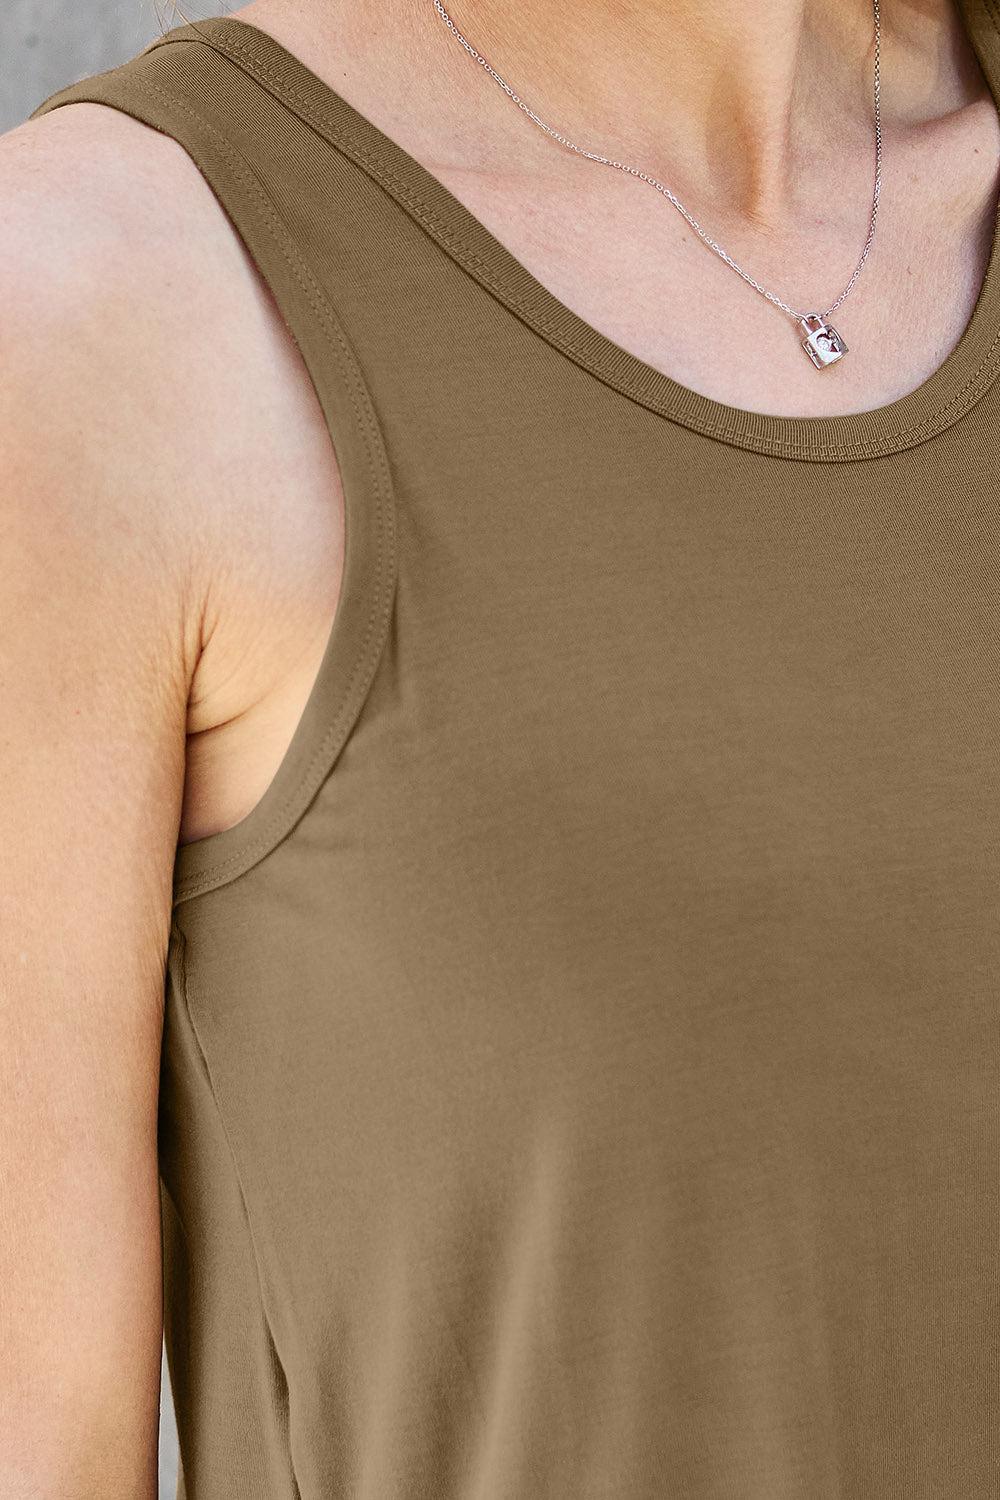 a woman wearing a brown tank top and a necklace